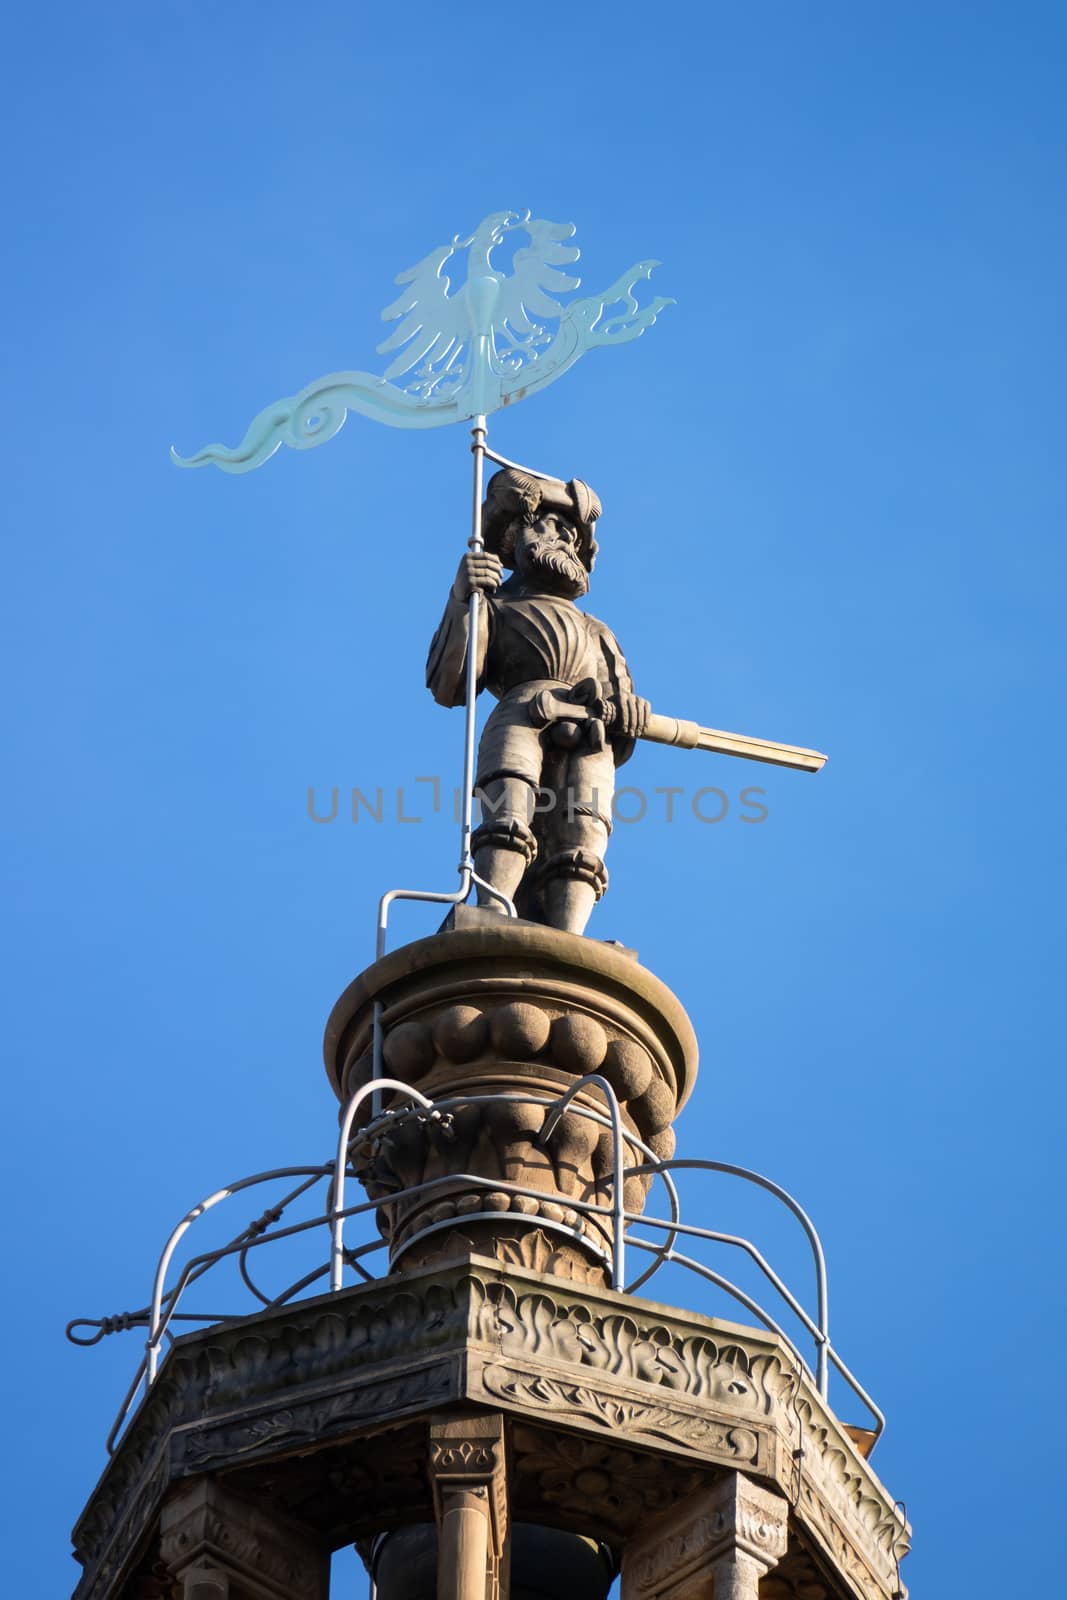 An image of a statue at the top of the Kilian Church in Heilbronn Germany